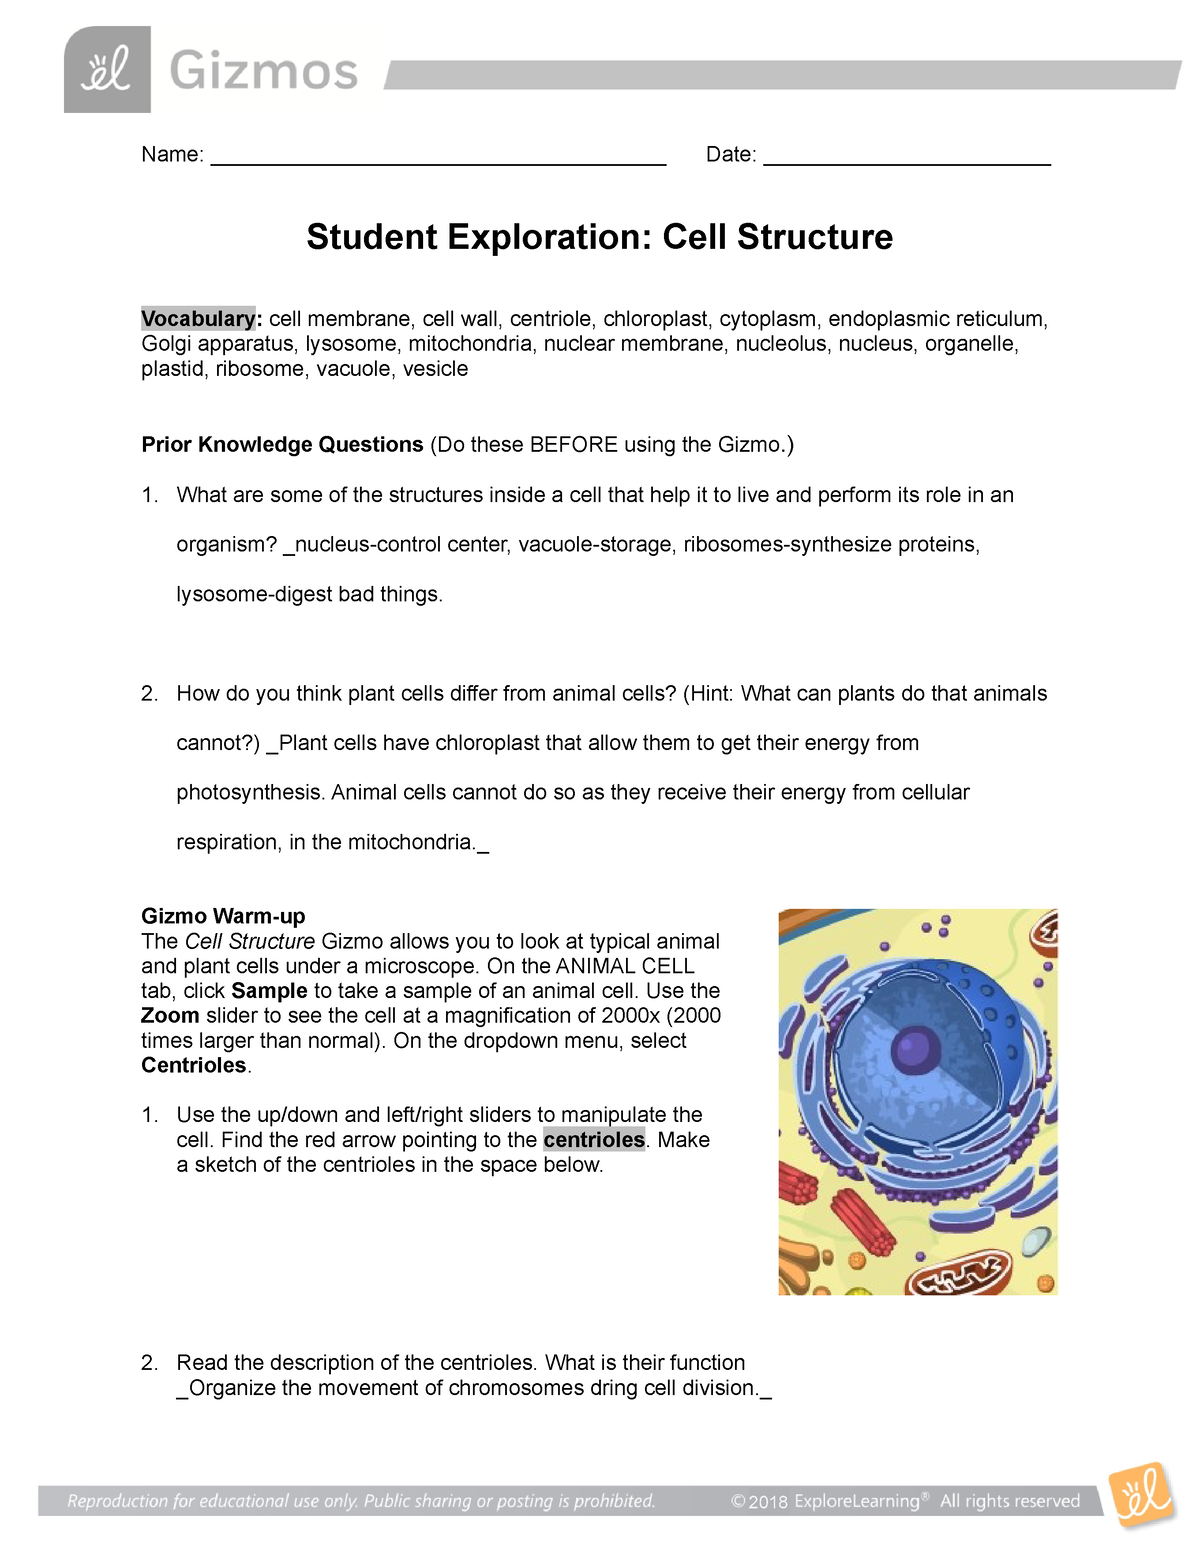 cell-structure-gizmo-worksheet-answer-key-2018-name